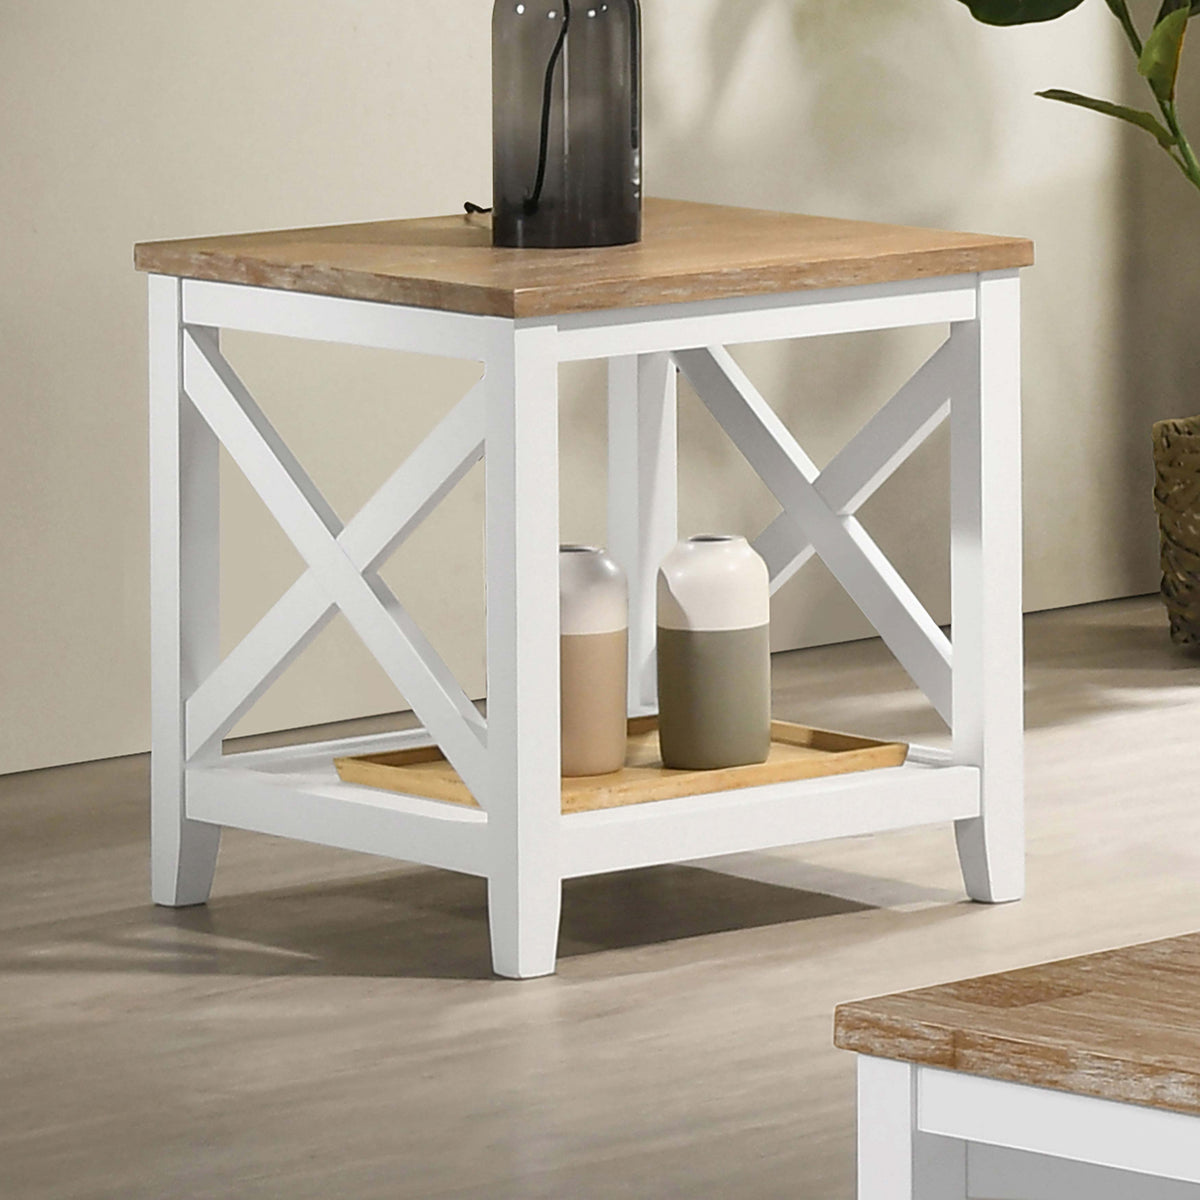 Maisy Square Wooden End Table With Shelf Brown and White  Half Price Furniture